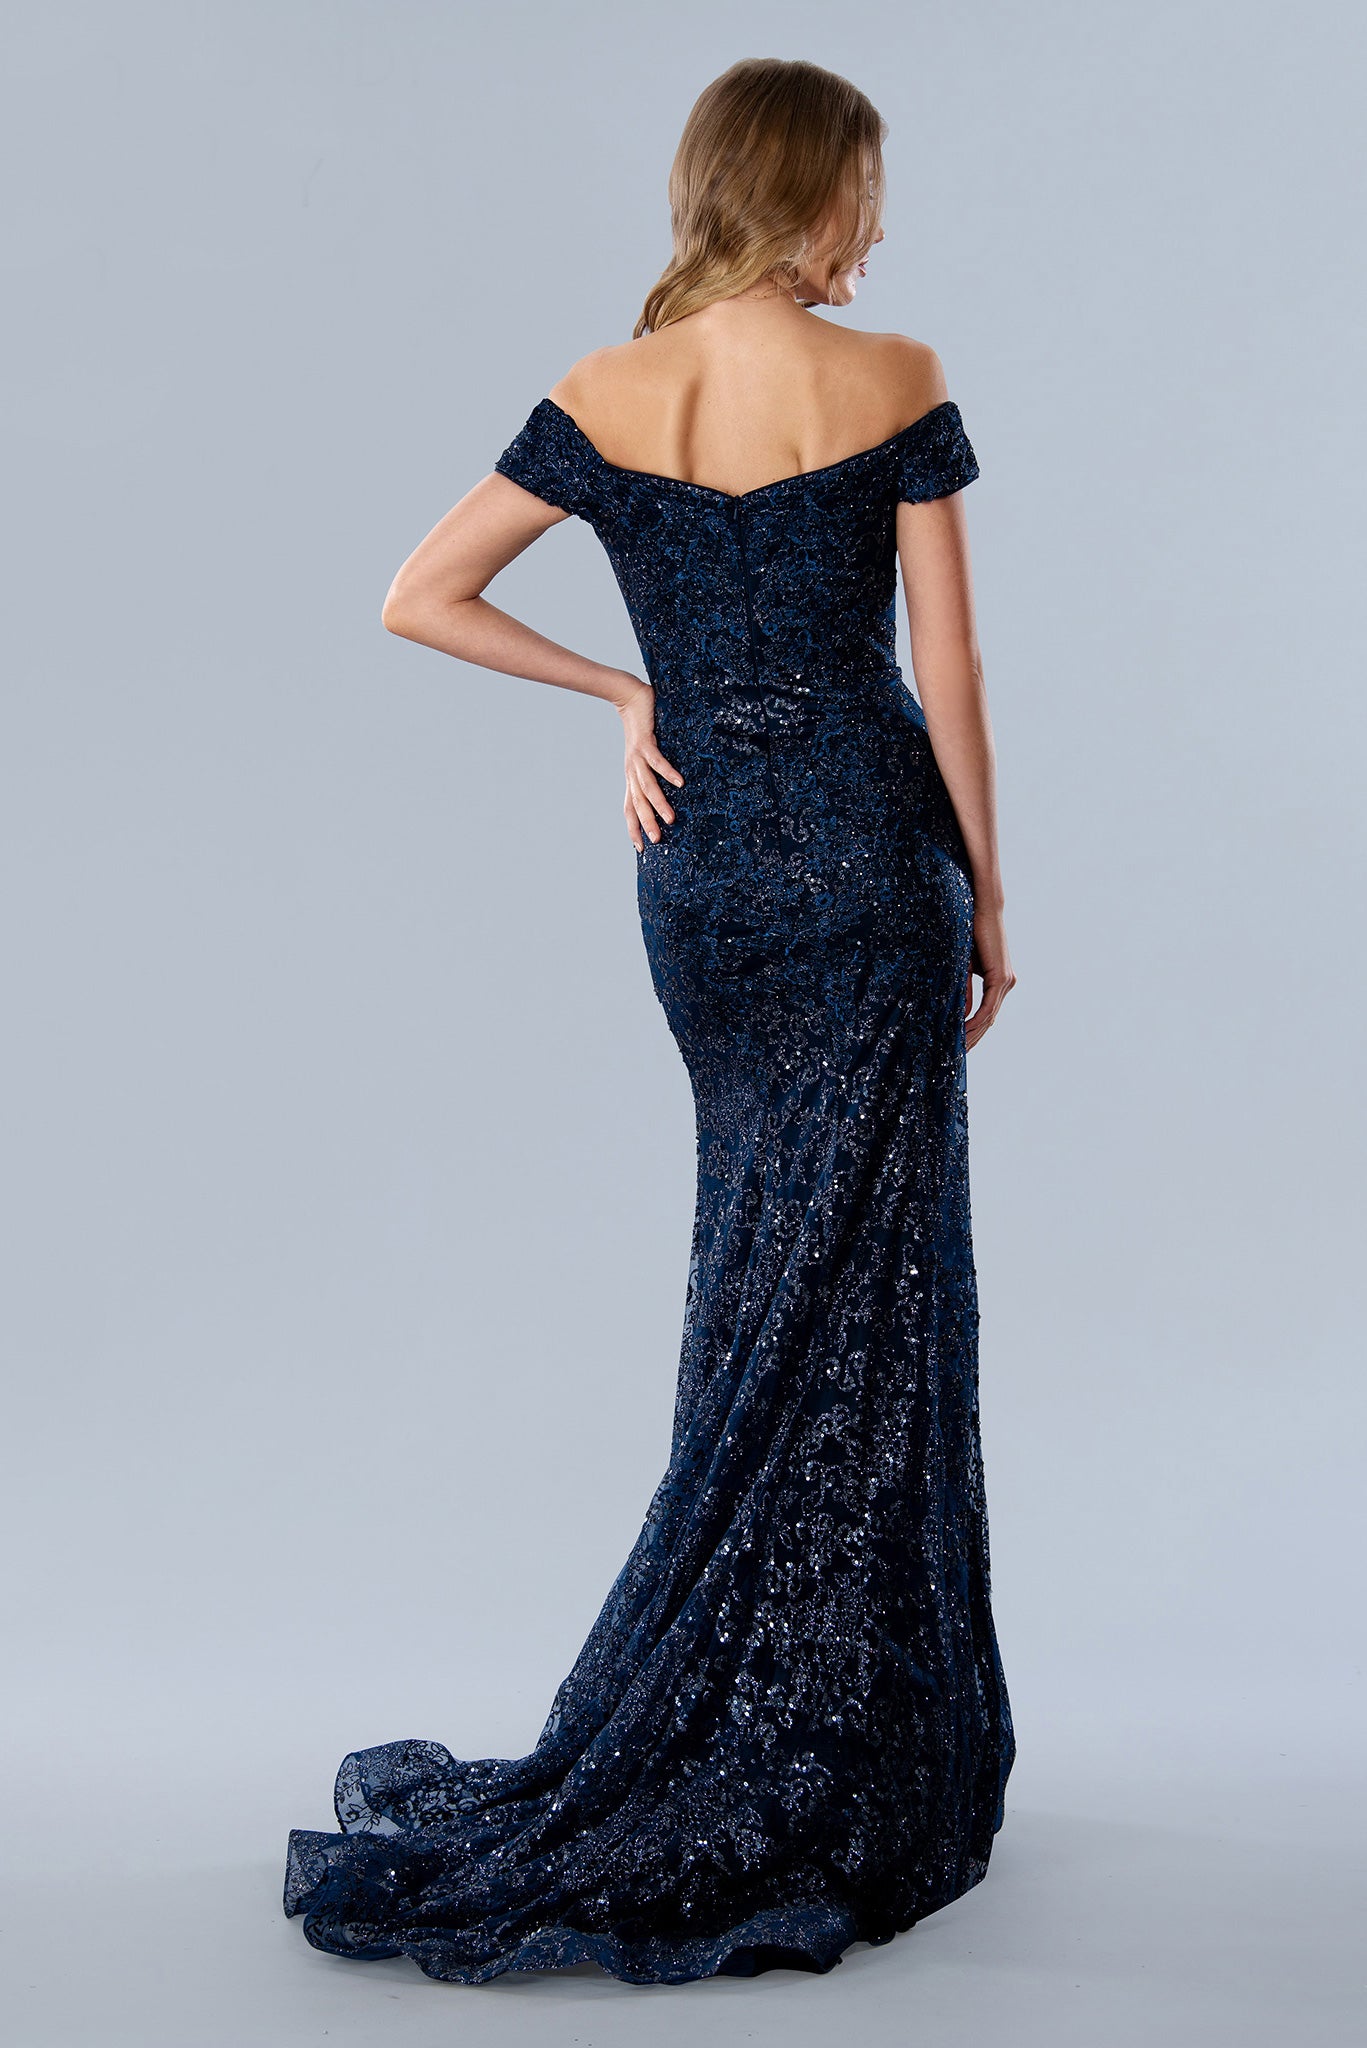 Stella Couture 22069 shimmer Glitter dress offers a stunningly glamorous look for prom. The fitted silhouette and off-the-shoulder design create an elegant, flattering shape, while sparkling glitter fabric adds a touch of glamour. Perfect for making a statement at your prom or special event. 